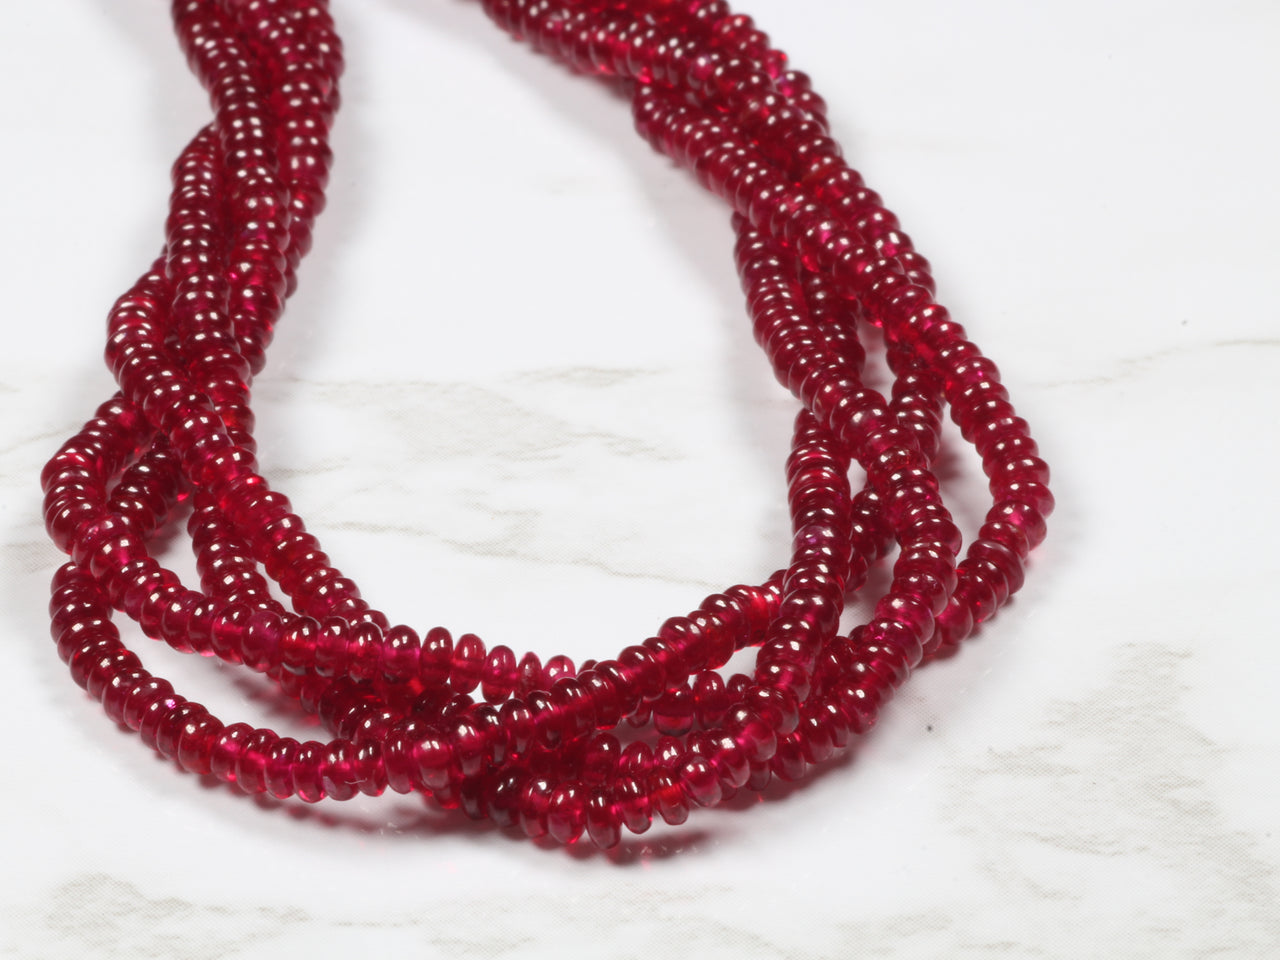 AAA Red Ruby 2.5mm Smooth Rondelles Bead Strand